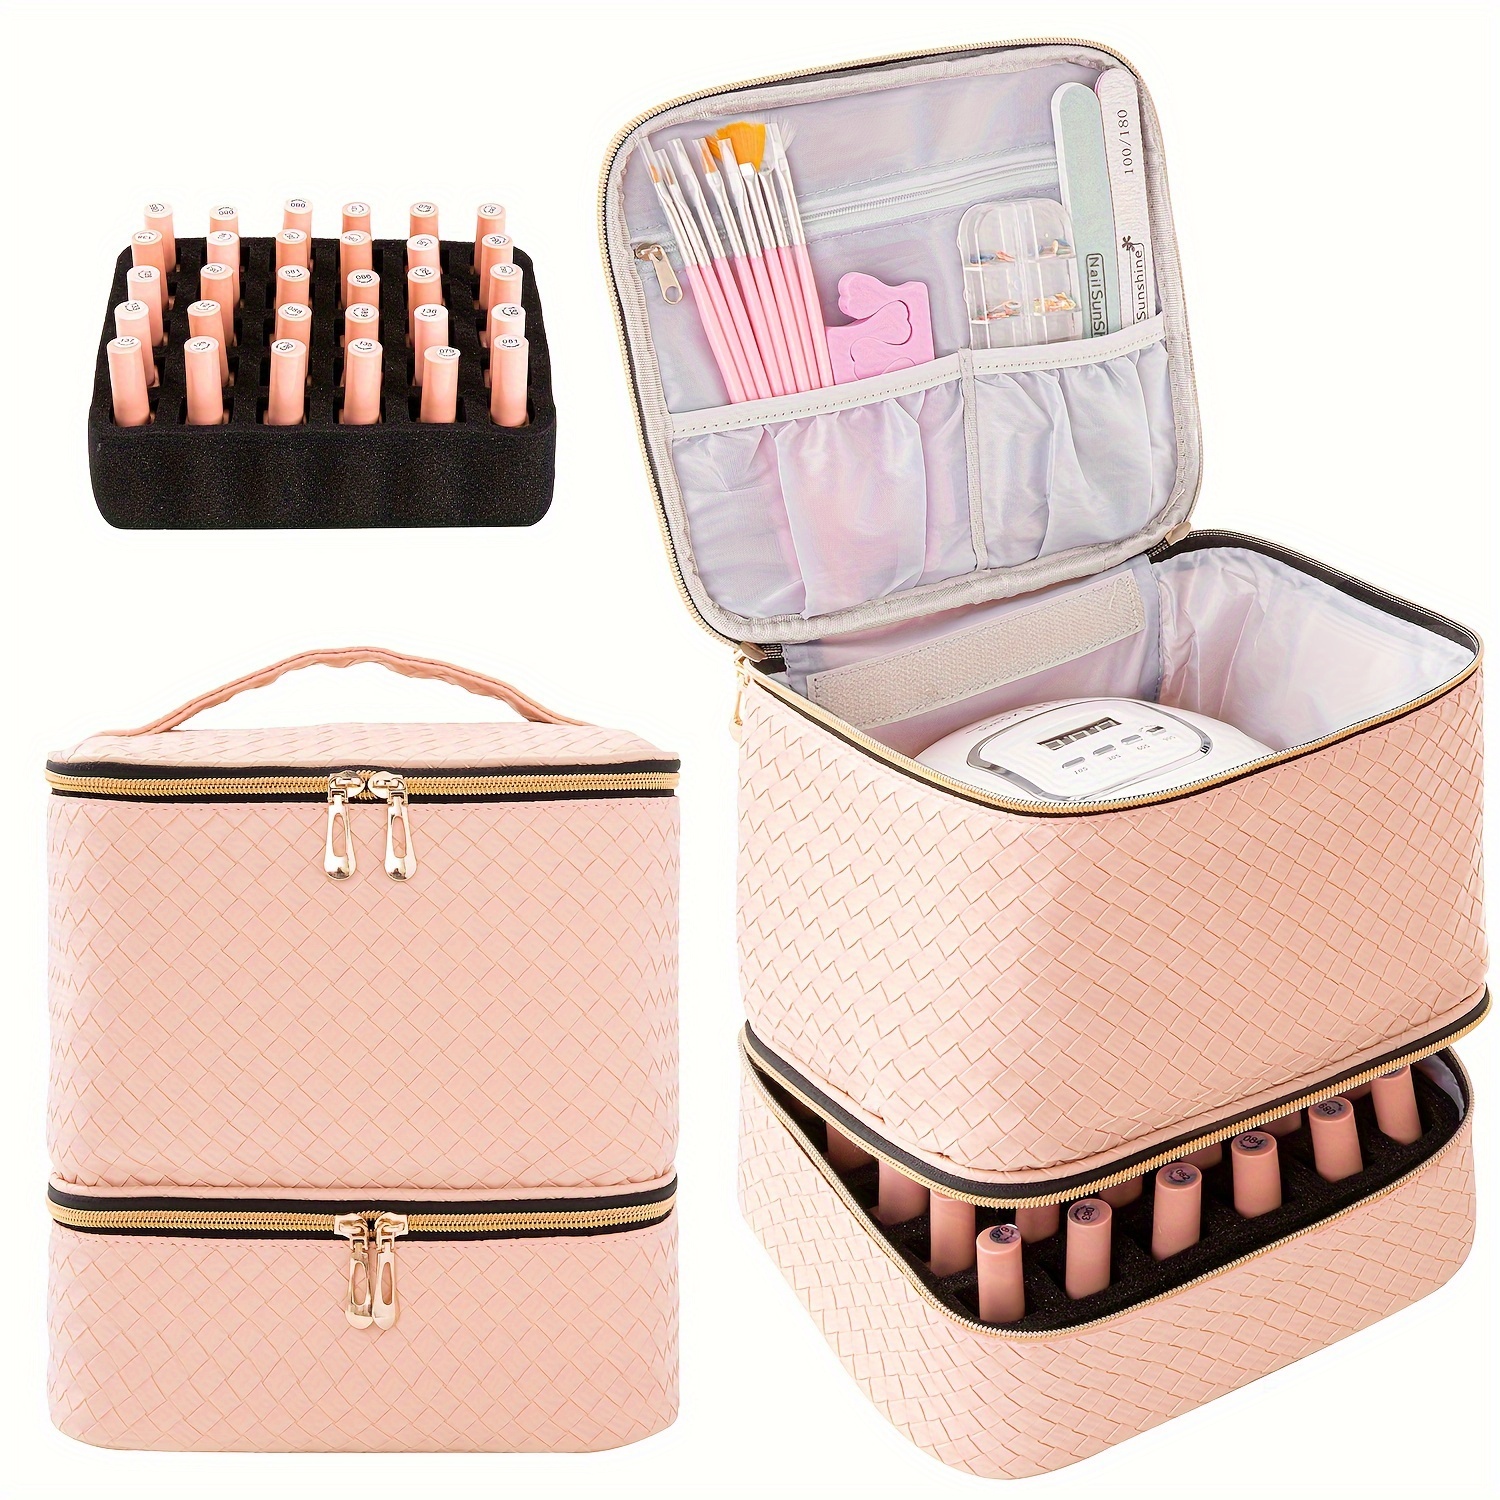 Nail Polish Organizer Case Portable Nail Polish Holder Double-layer Storage  Bag for 42 Bottles (15ml ) with Adjustable Dividers Nail Polish and  Manicure Set